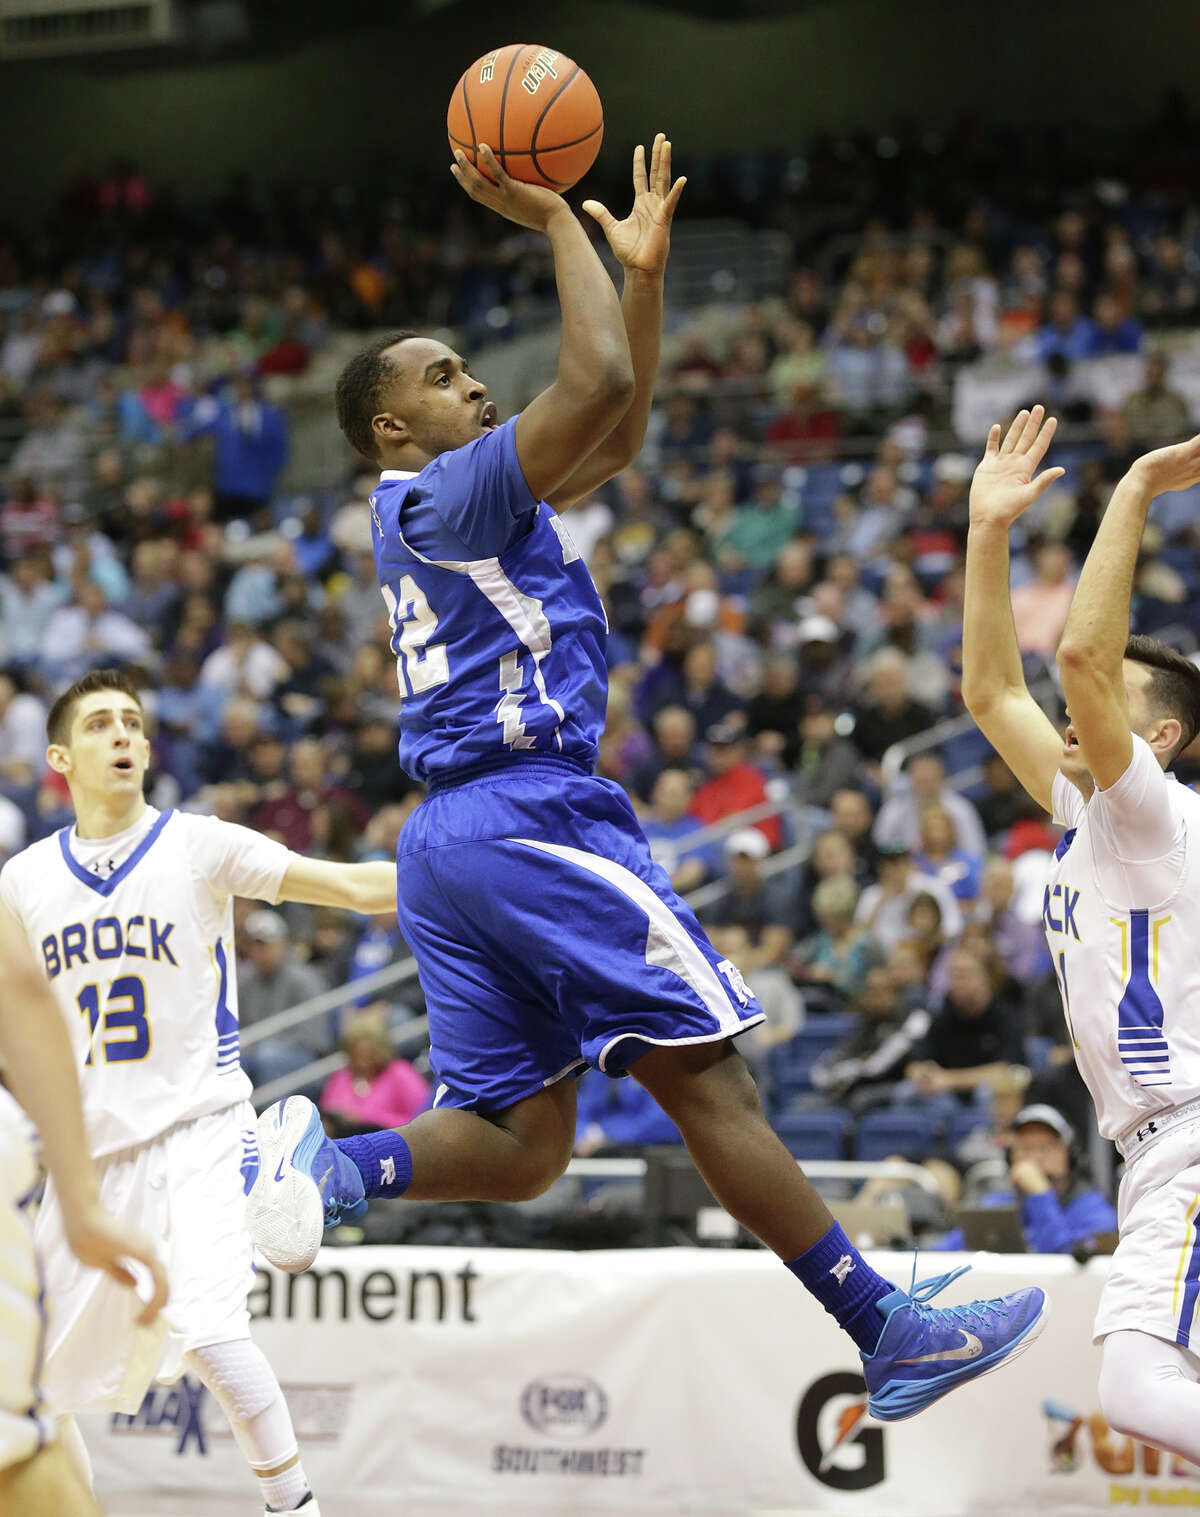 Ro-Hawk center Bryan London gets off a runner in the lane as Randolph plays Brock in the 3A finals of the UIL state basketball tournament at the Alamodome in San Antonio on March 14, 2015.